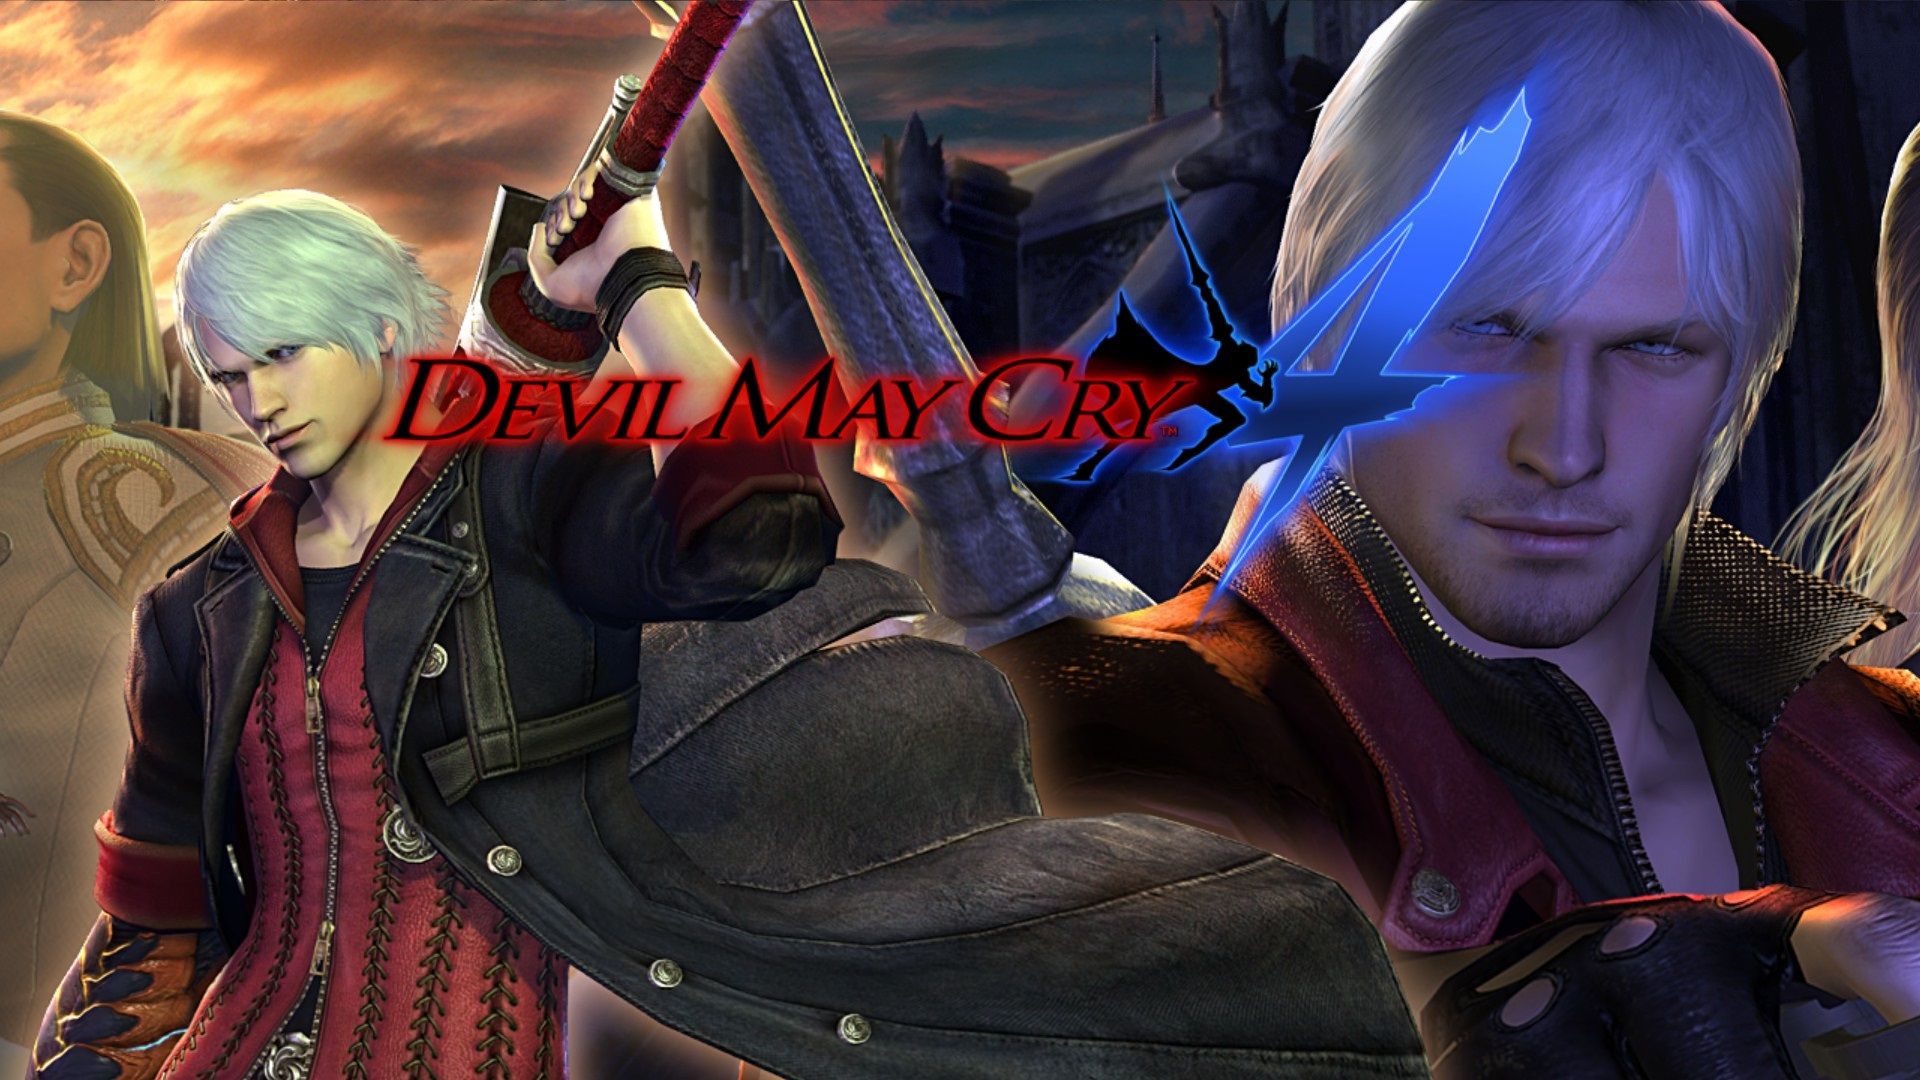 Devil May Cry 4 Wallpapers by Treesie on DeviantArt